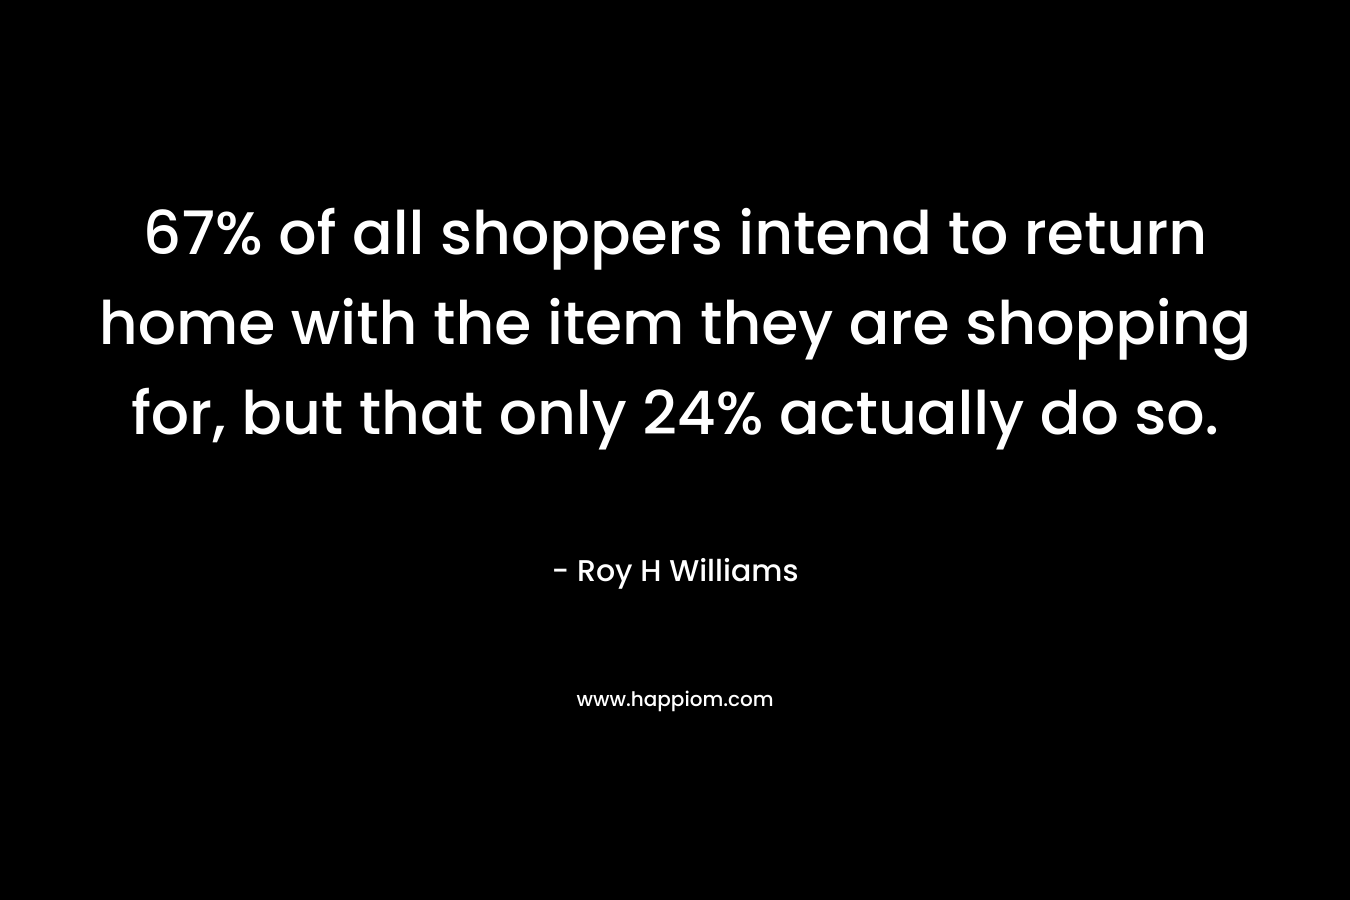 67% of all shoppers intend to return home with the item they are shopping for, but that only 24% actually do so. – Roy H Williams